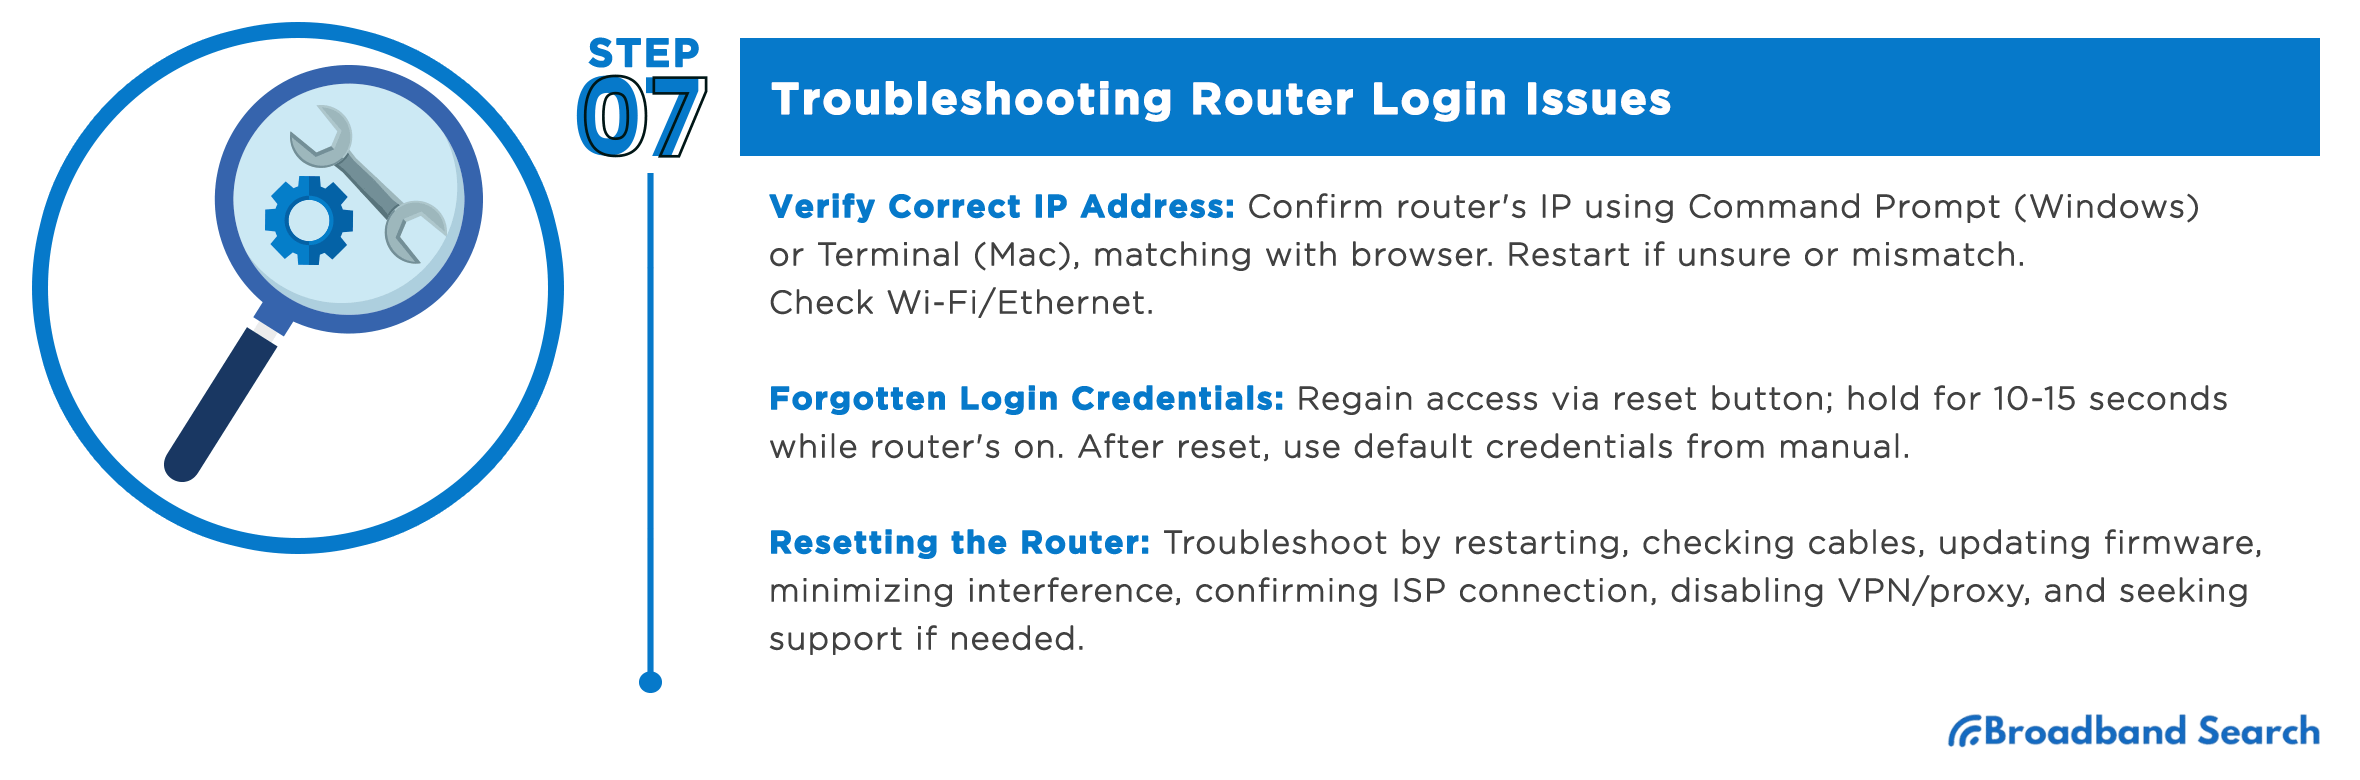 How to troubleshoot router login issues